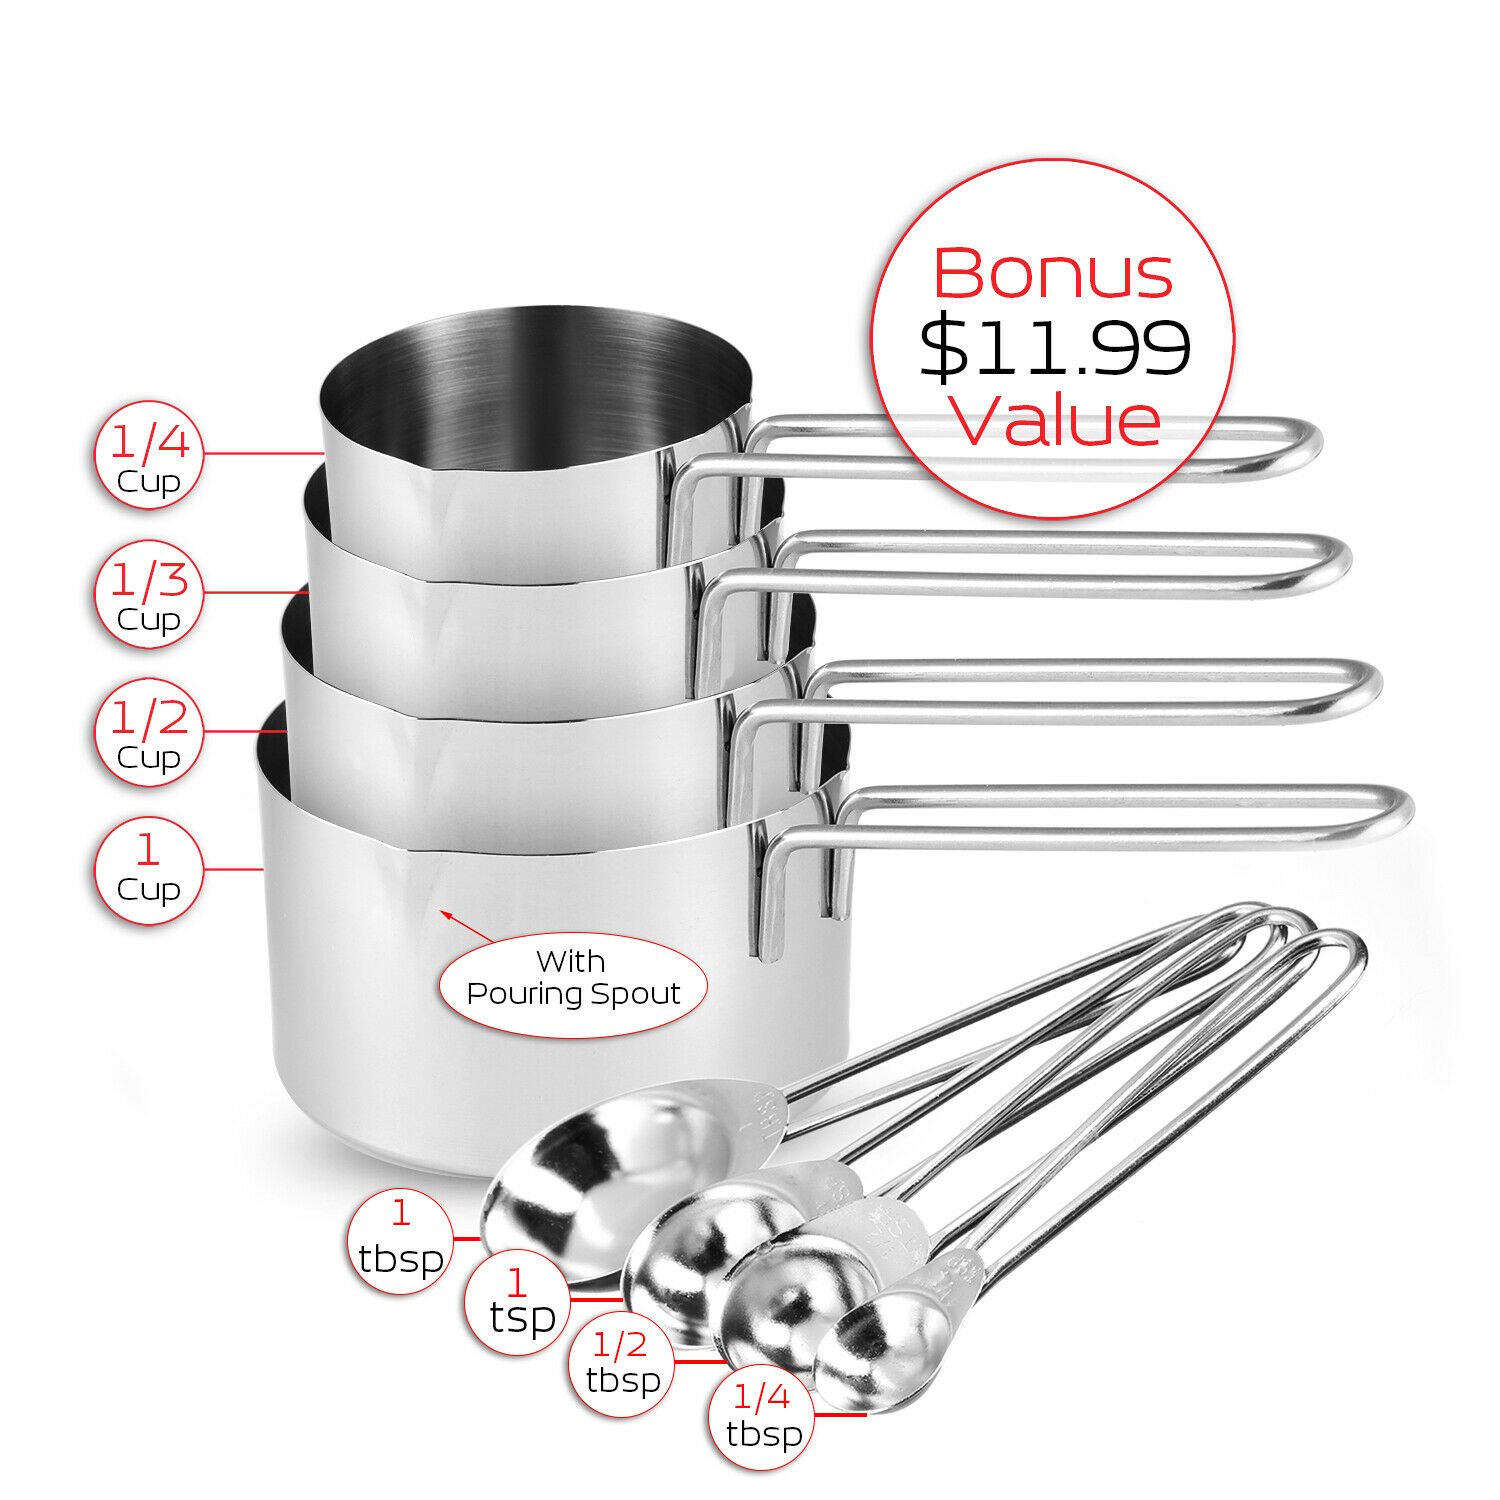 Image 31 - Stainless Steel Mixing Bowls 14 Piece Bowl Set with Measuring Cups and Spoons